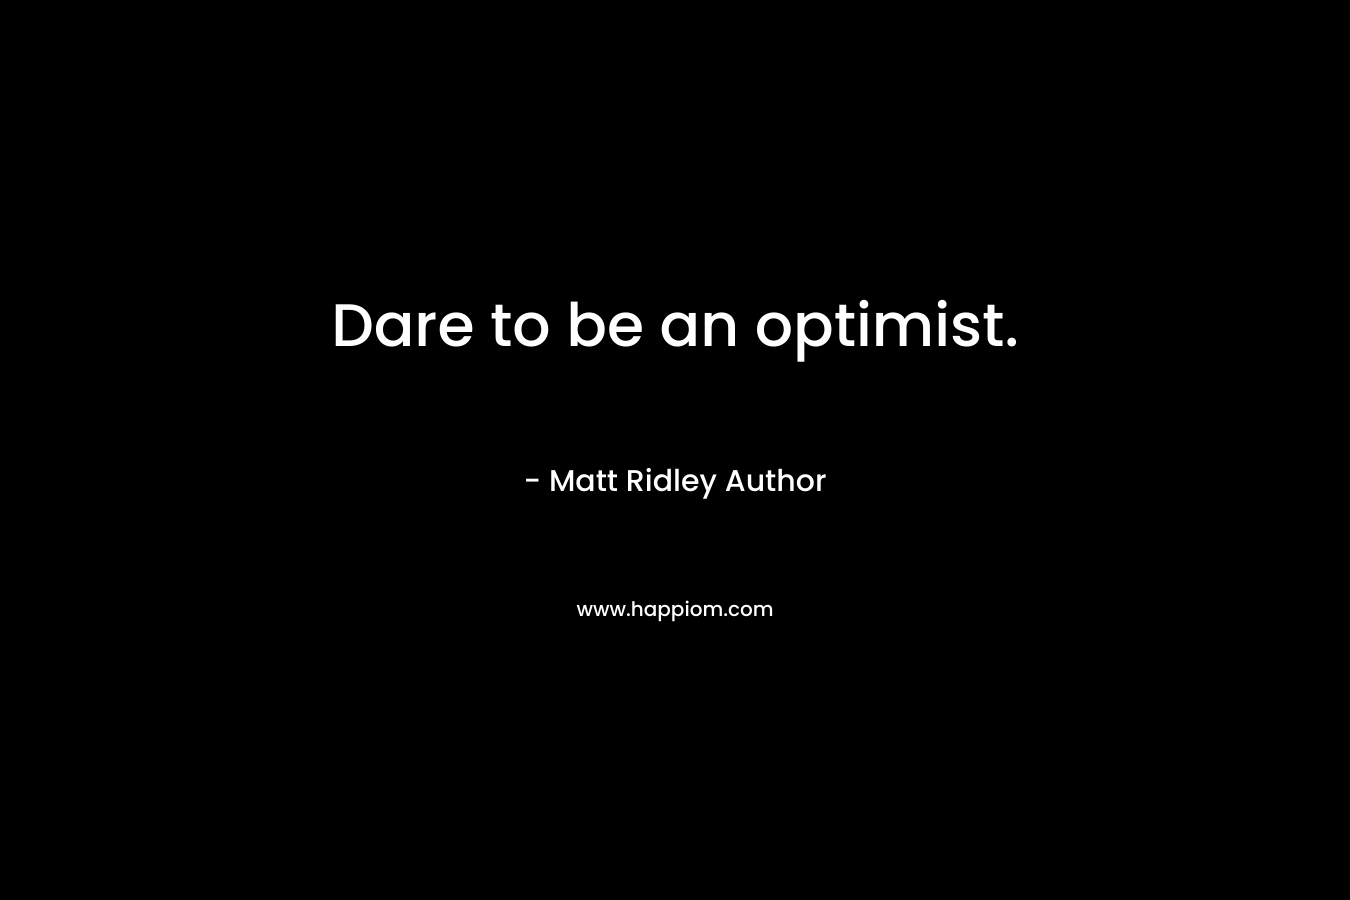 Dare to be an optimist.